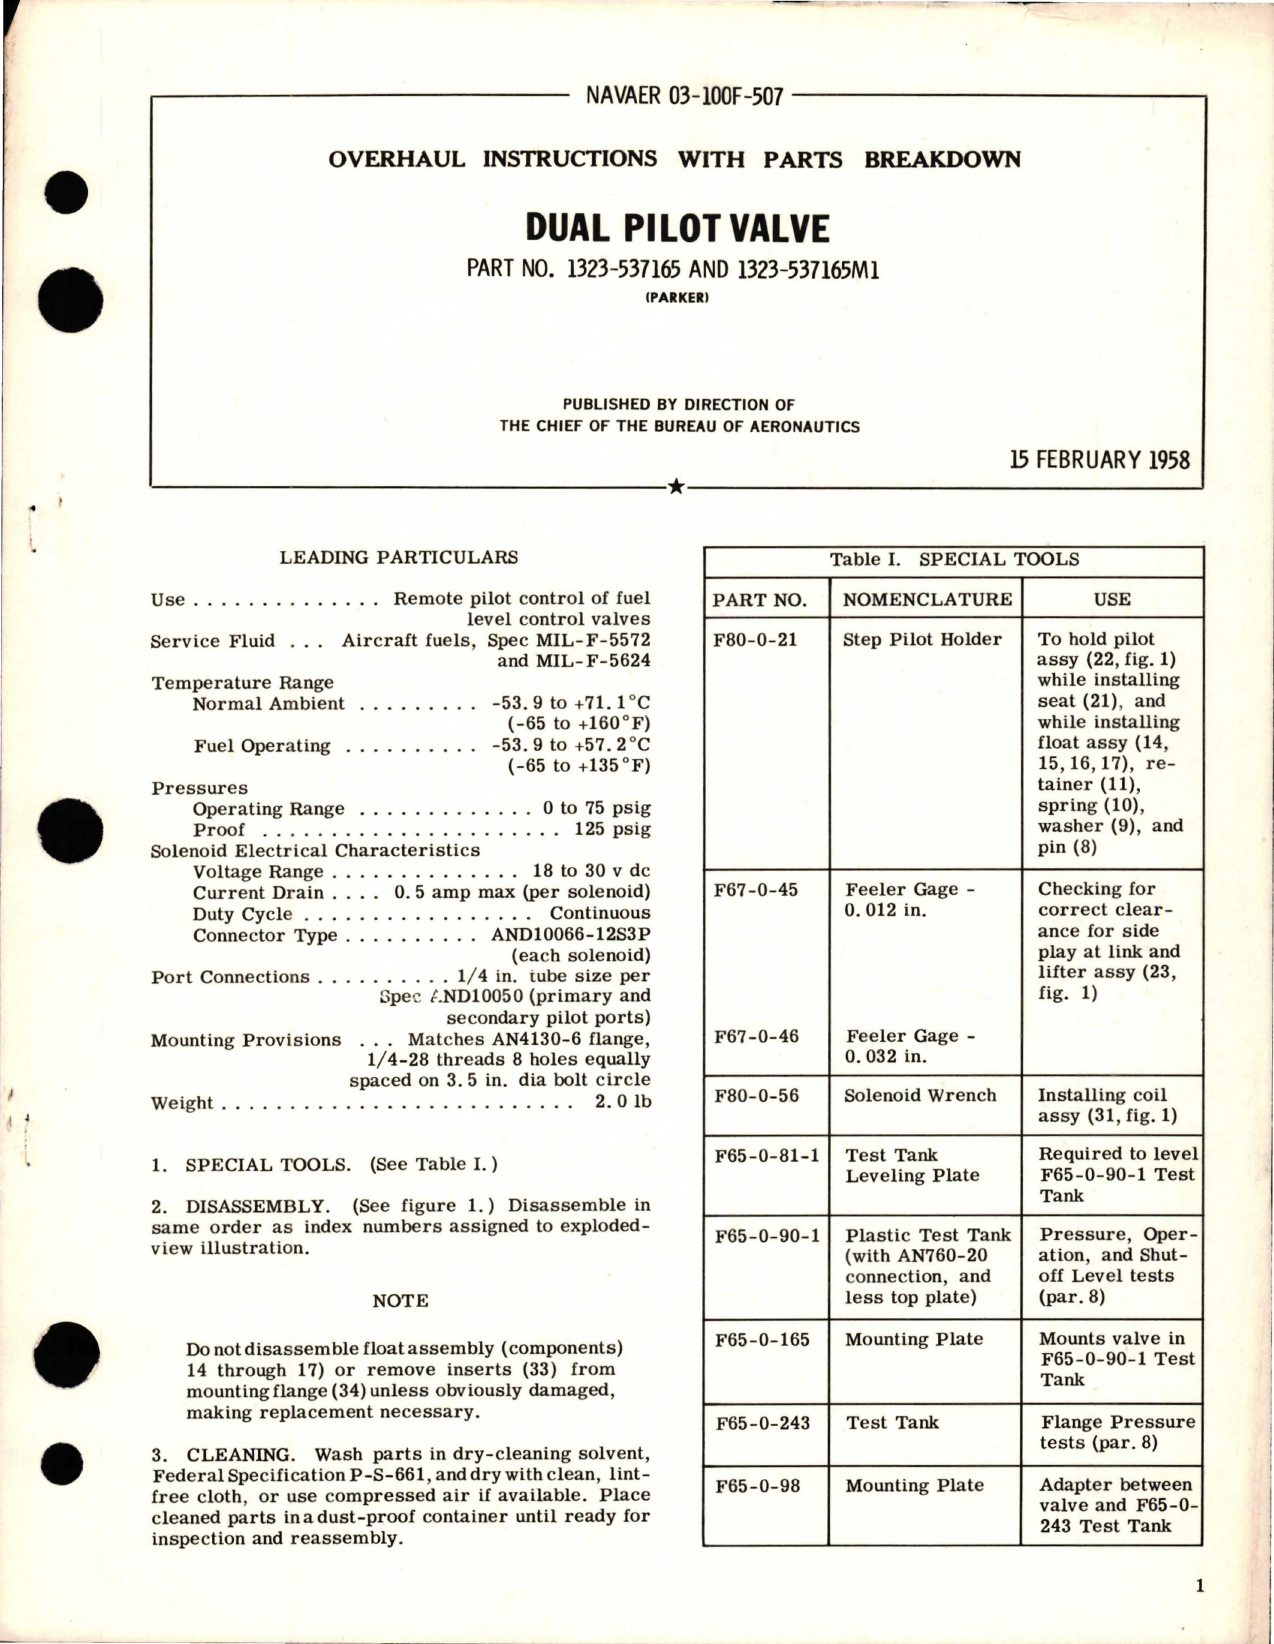 Sample page 1 from AirCorps Library document: Overhaul Instructions with Parts Breakdown for Dual Pilot Valve - Part 1323-537165 and 1323-537165M1